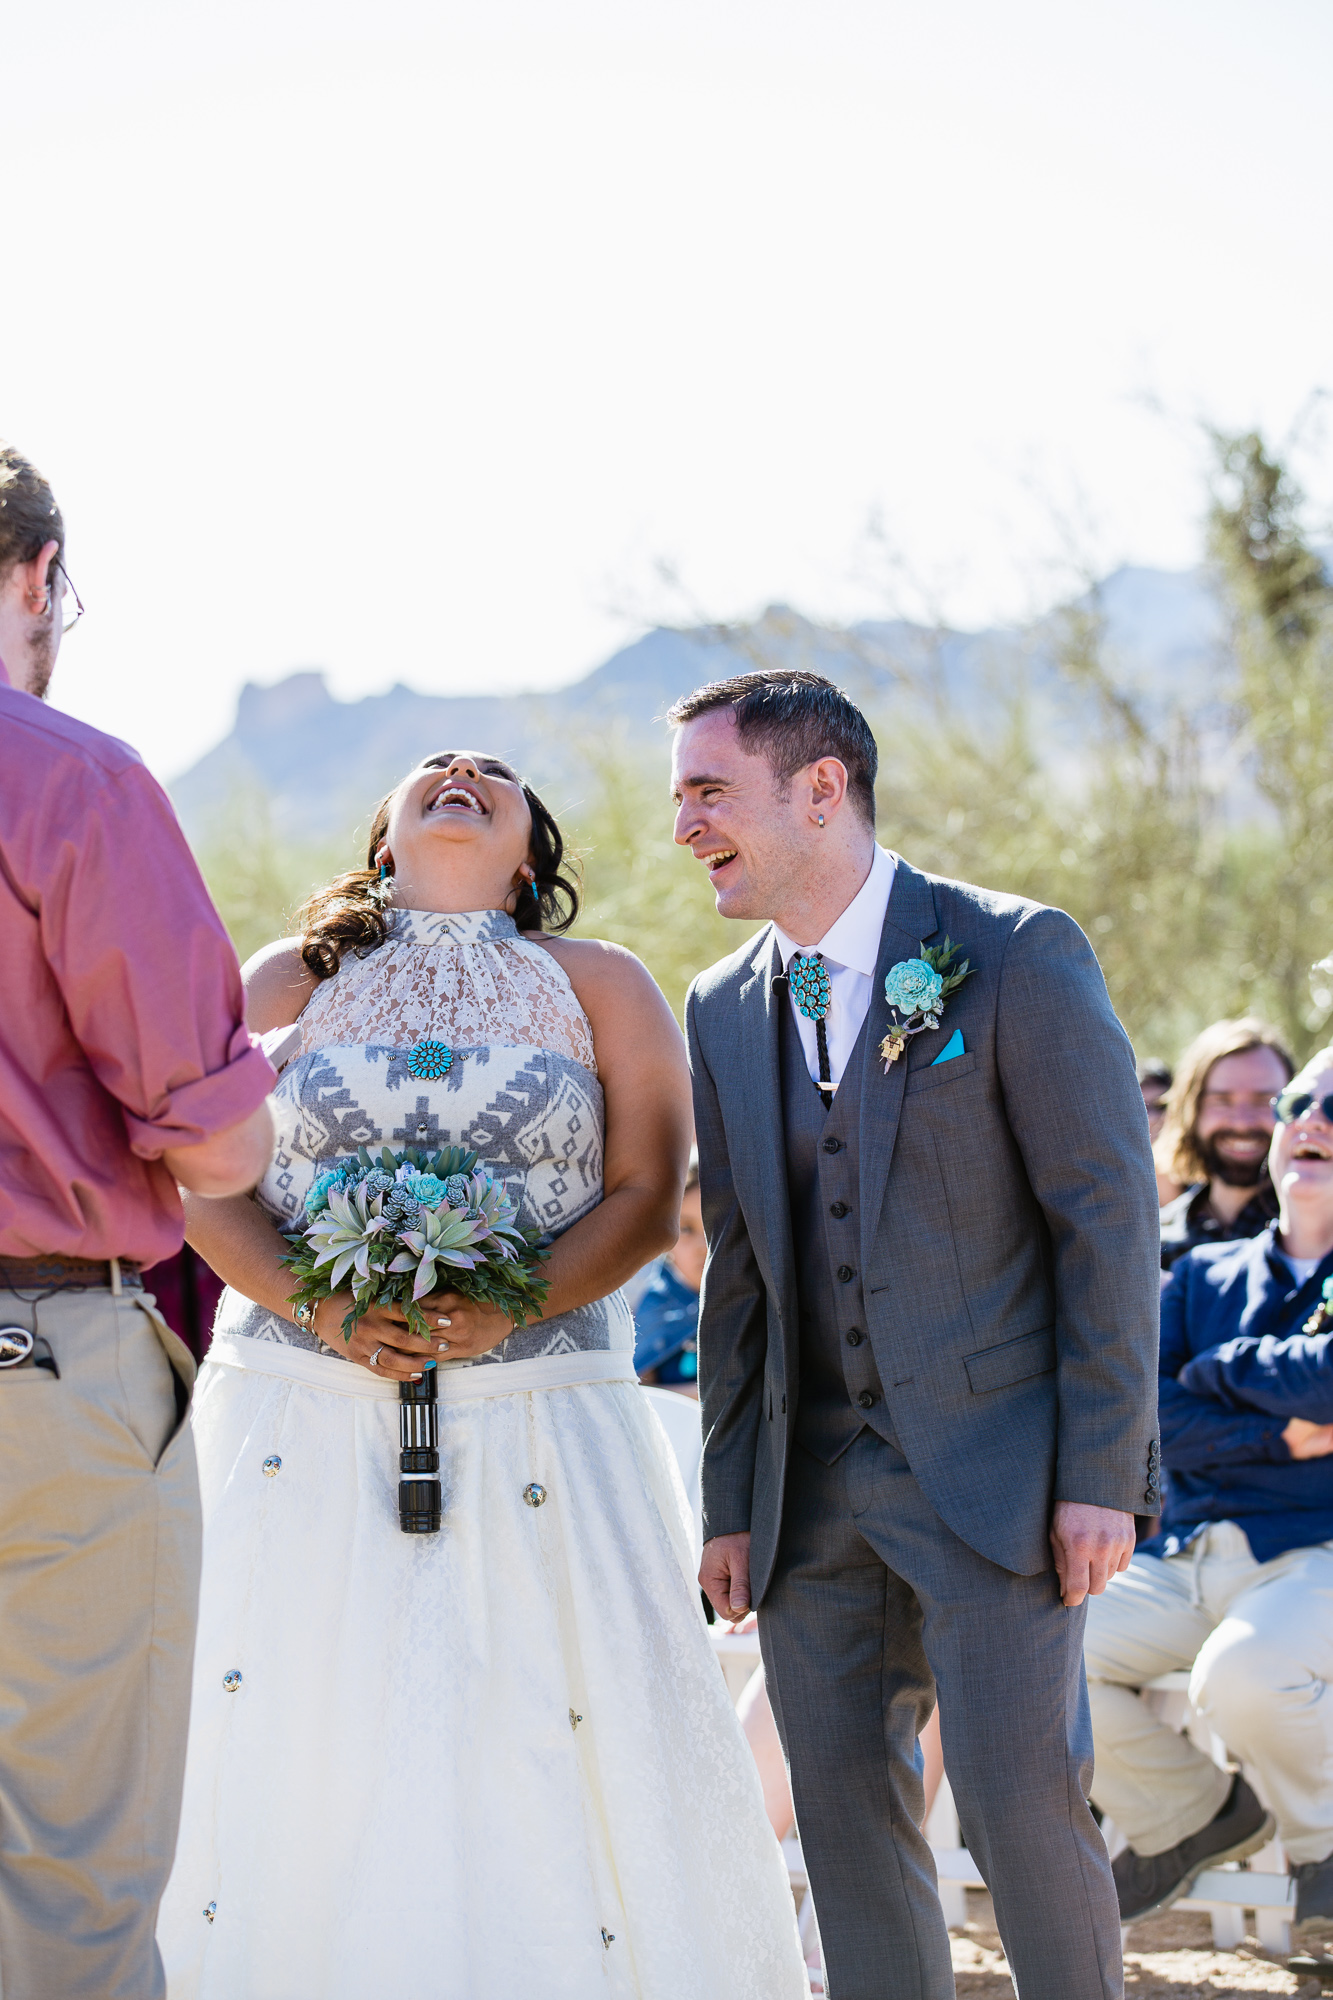 Bride and groom sharing a laugh during their Lost Dutchman State Park wedding ceremony by Arizona wedding photographer PMA Photography.